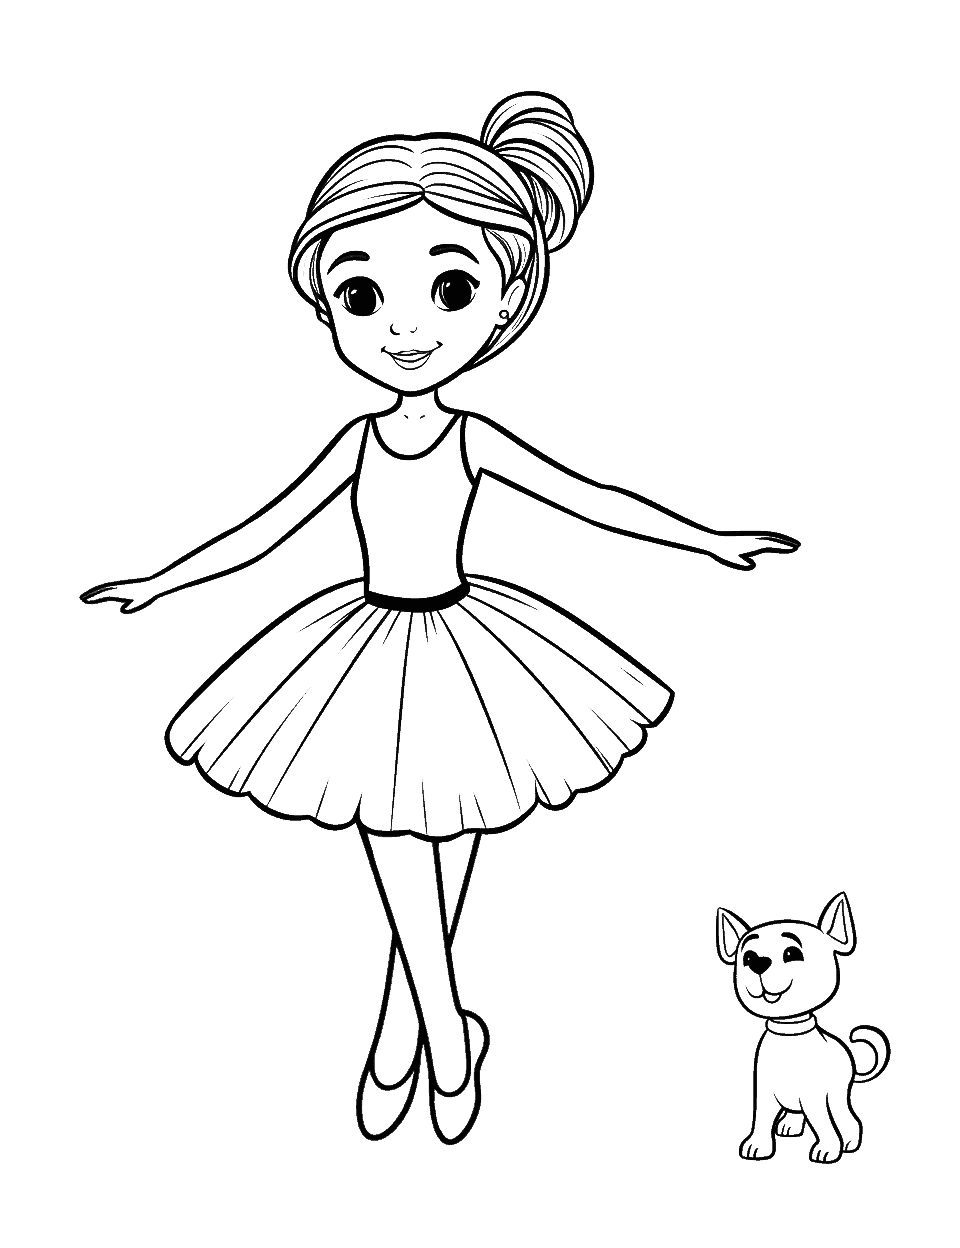 25 Ballerina Coloring Pages: Free Printable Sheets - Free Printable Dance Pictures